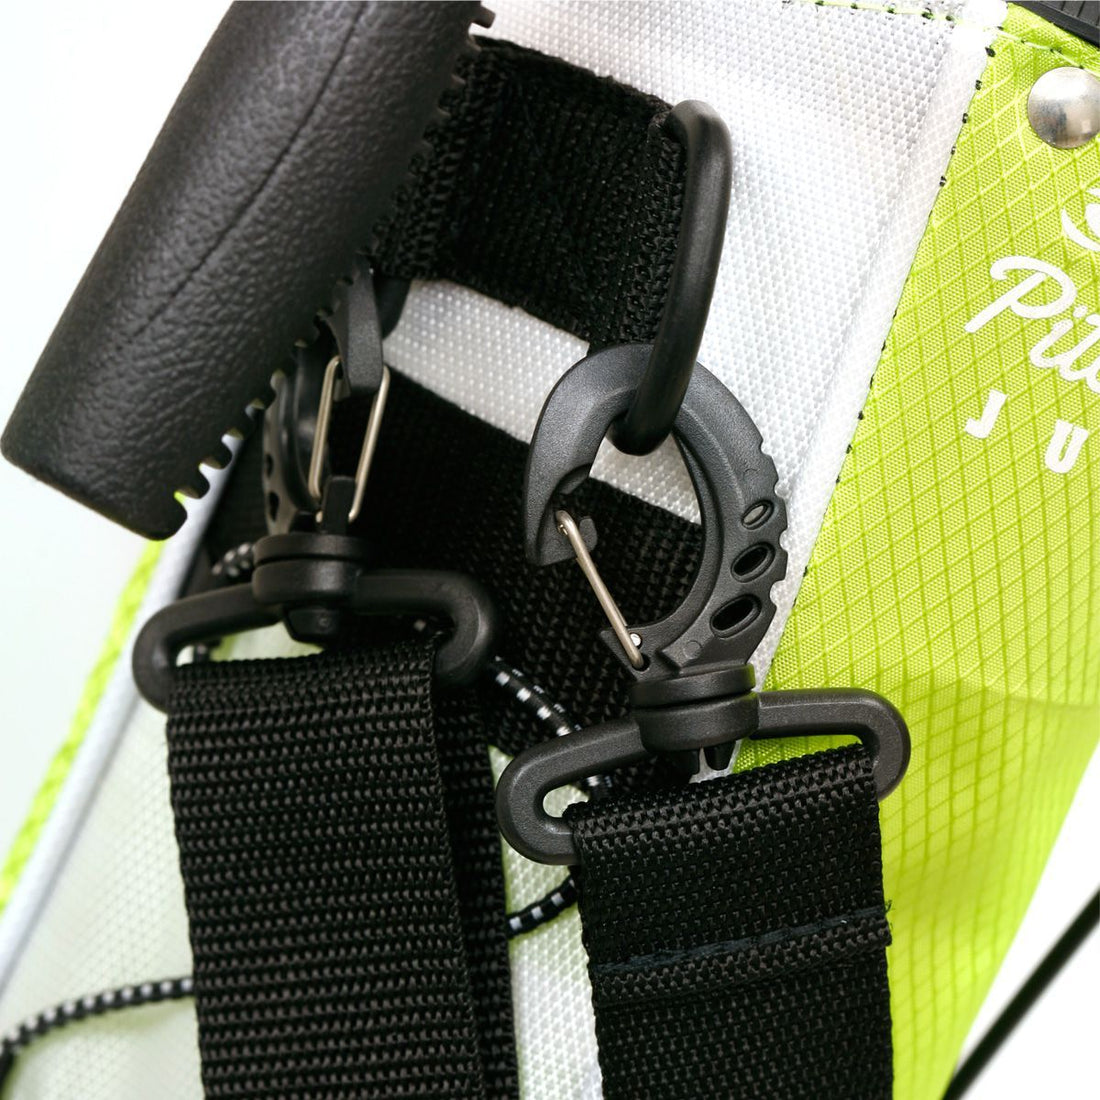 carry handle and shoulder strap clips on a lime green Orlimar Pitch &